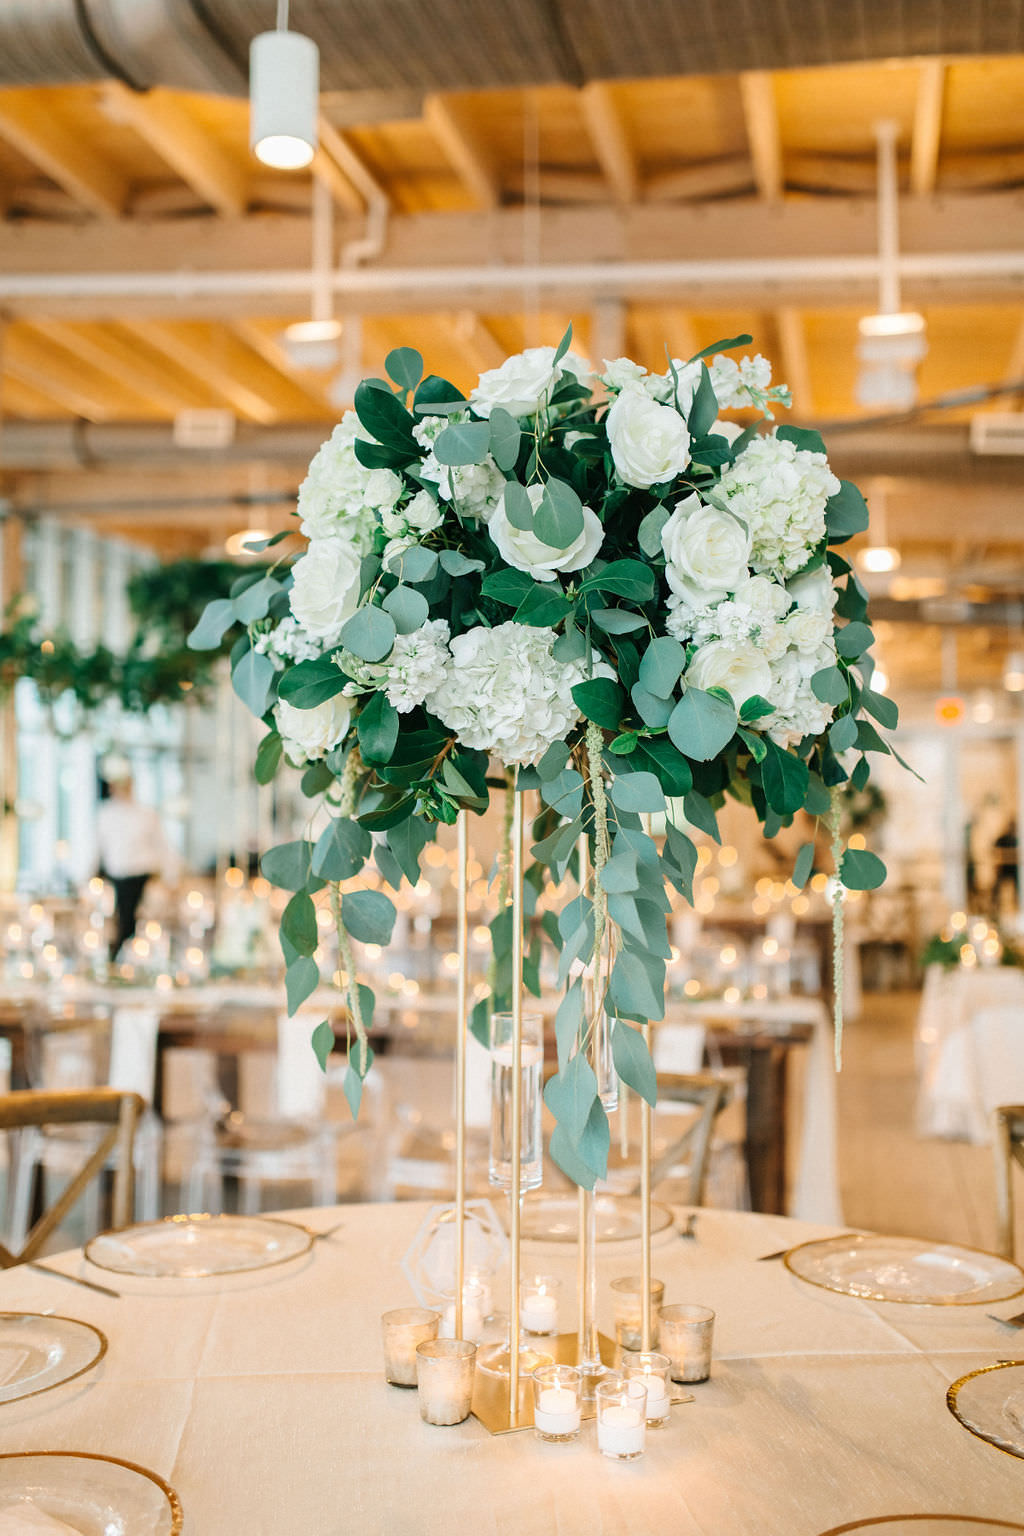 Modern, Elegant Florida Wedding Decor and Reception, Tall Floral Centerpiece with White Roses and Ivory Florals, and Greenery, Gold Geometric Accents, Clear Chargers, Round Tables with Linens | Tampa Bay Wedding Planner UNIQUE Weddings and Events | Florida Special Event Rental Company Over The Top Linens | Tampa Decor Rental A Chair Affair